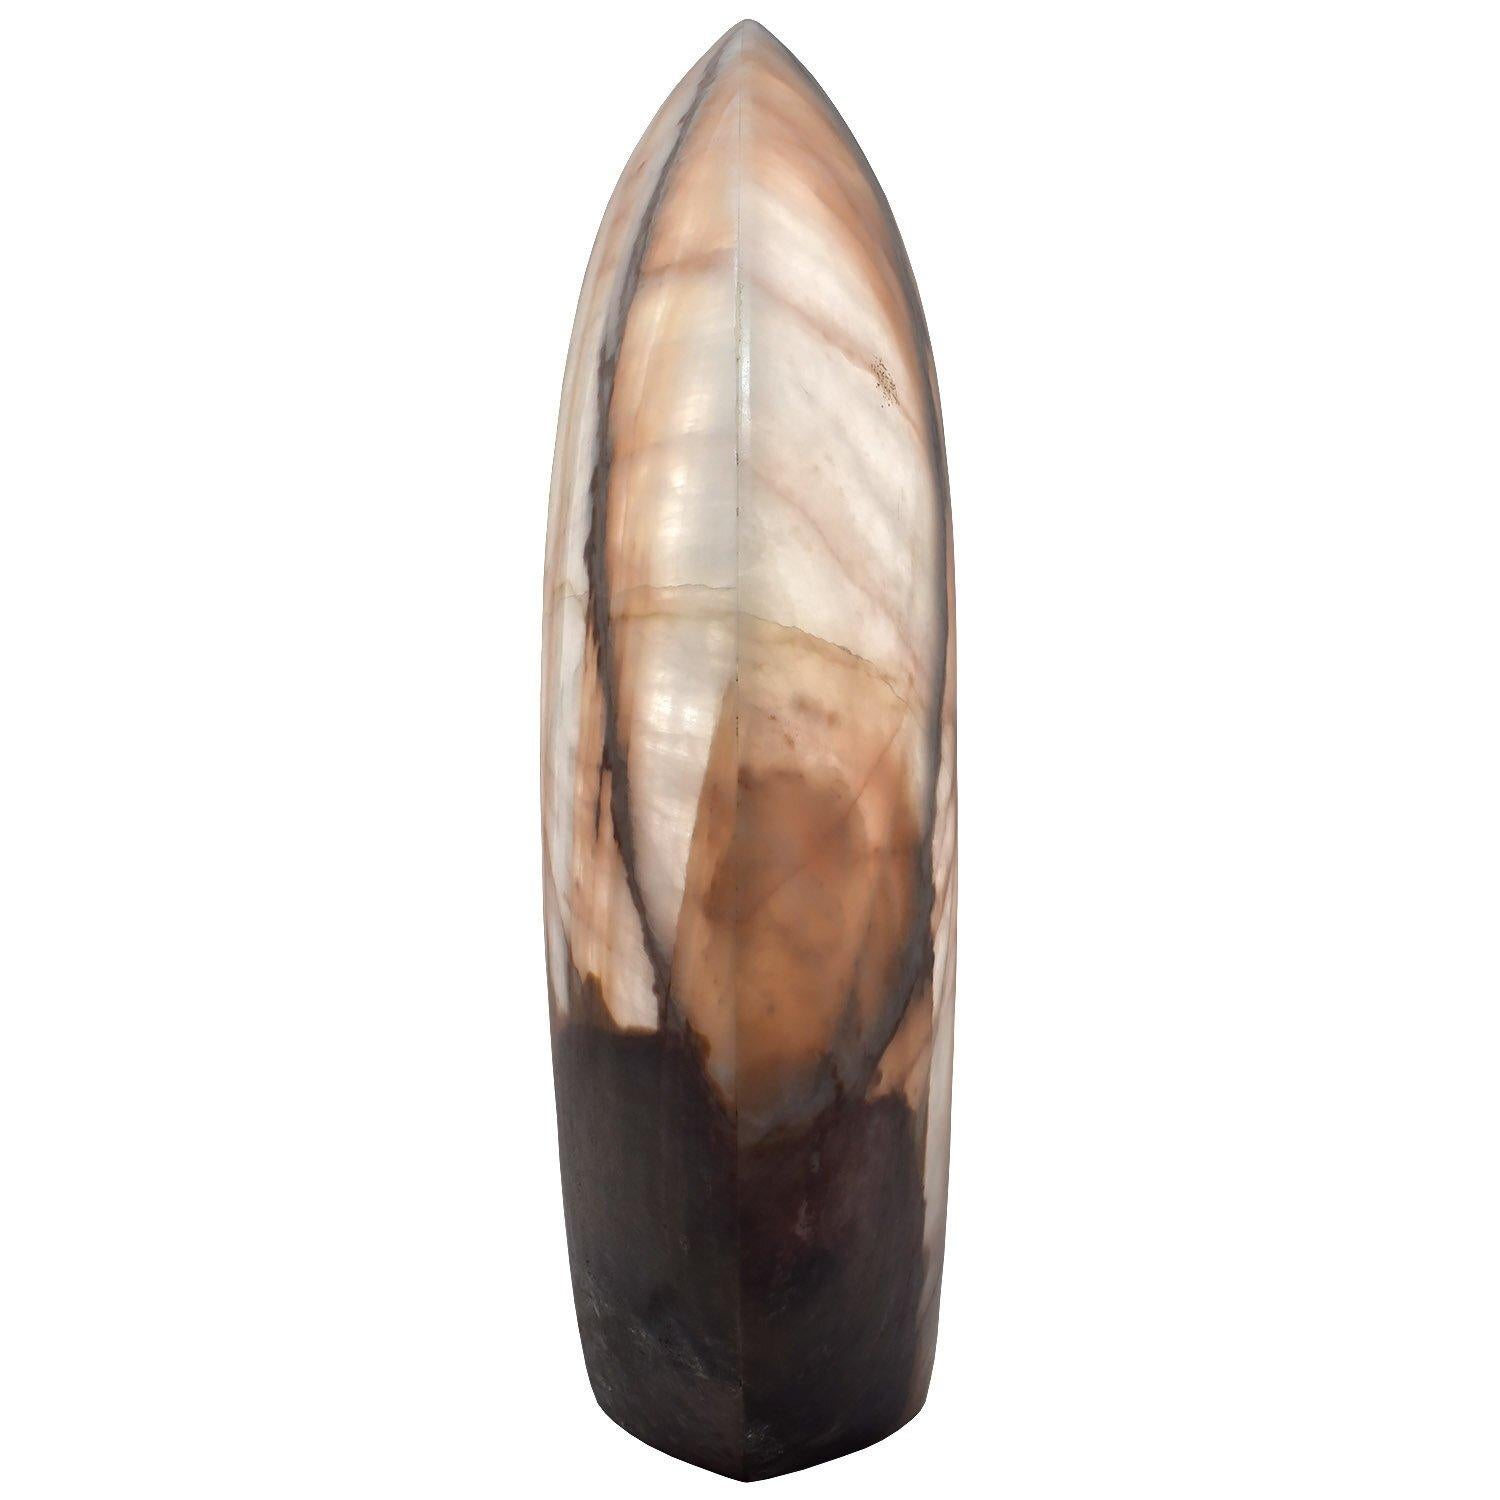 Carved Contemporay Natural Pink White and Brown Onyx Table Top Lamp For Sale